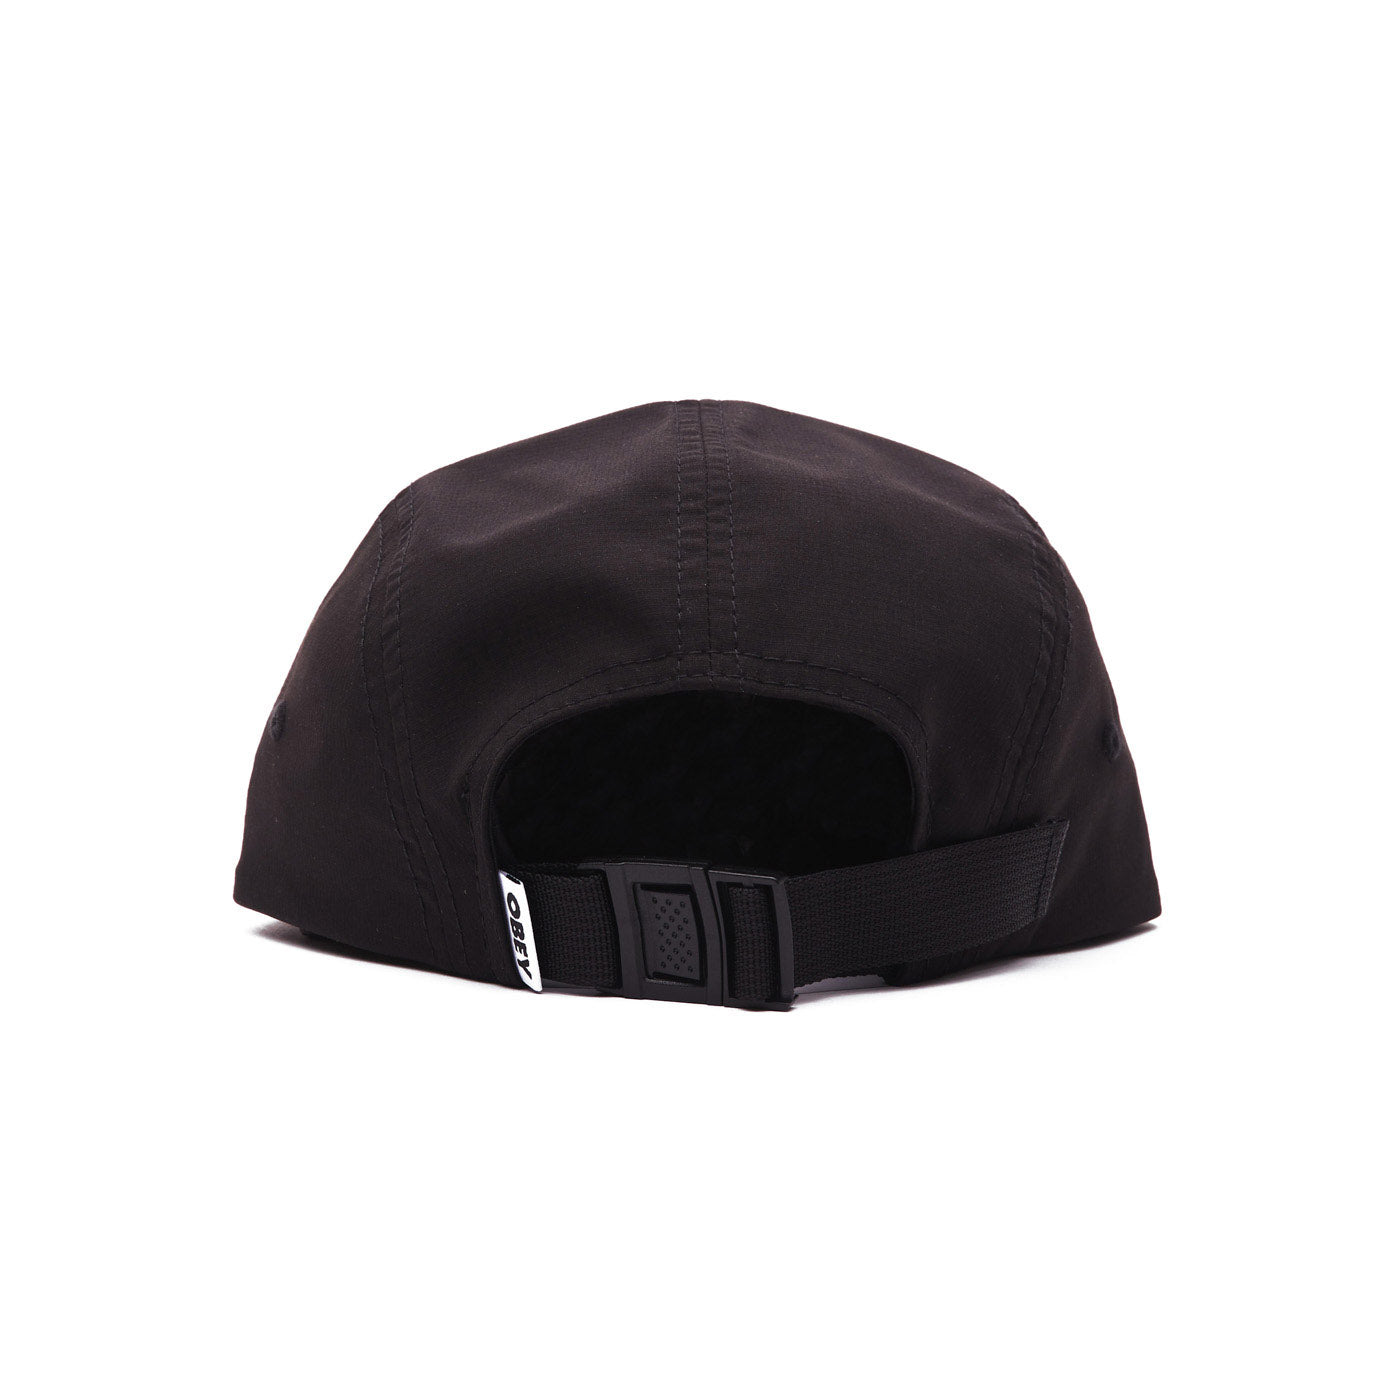 obey ripstop camp hat black